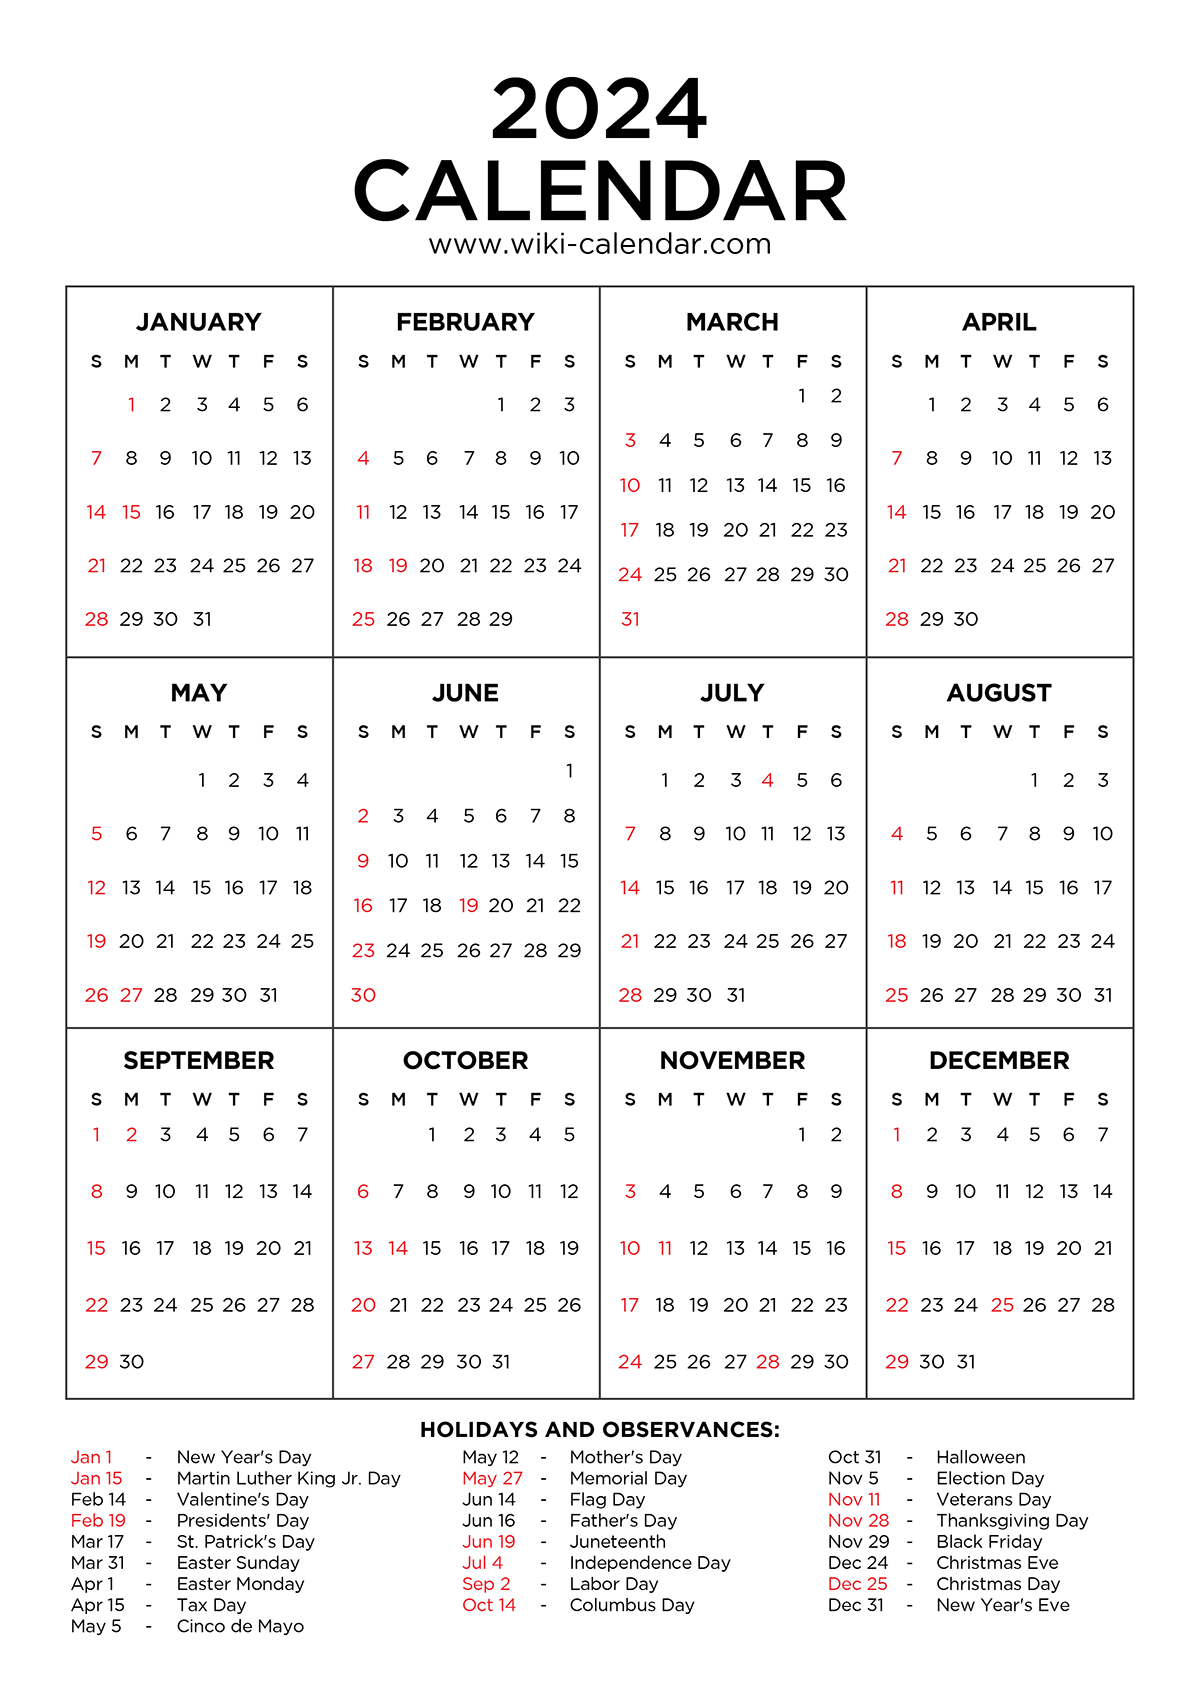 Year 2024 Calendar Printable With Holidays - Wiki Calendar pertaining to Free Printable Calendar 2024 Canada Monthly